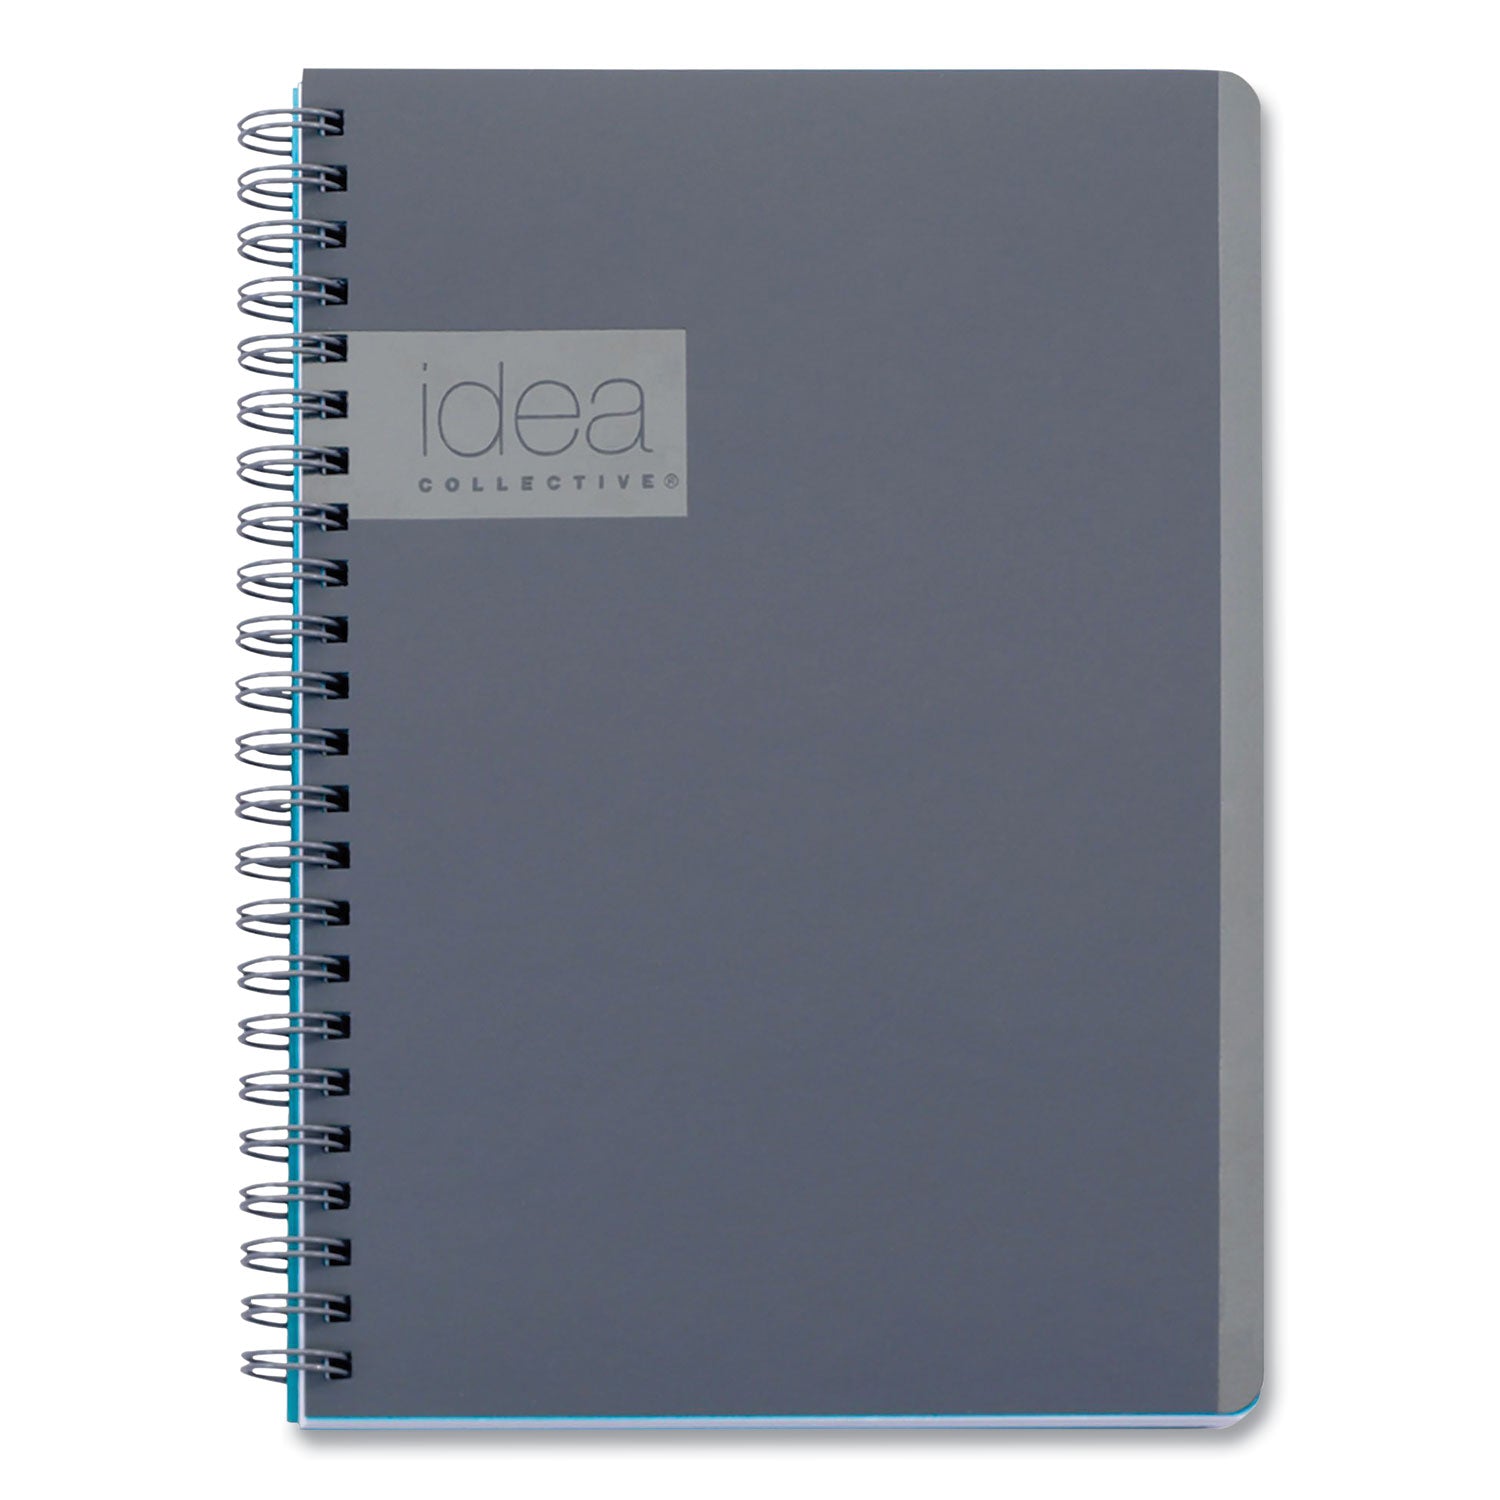 idea-collective-professional-notebook-1-subject-medium-college-rule-gray-cover-80-8-x-487-sheets_oxf57010ic - 1